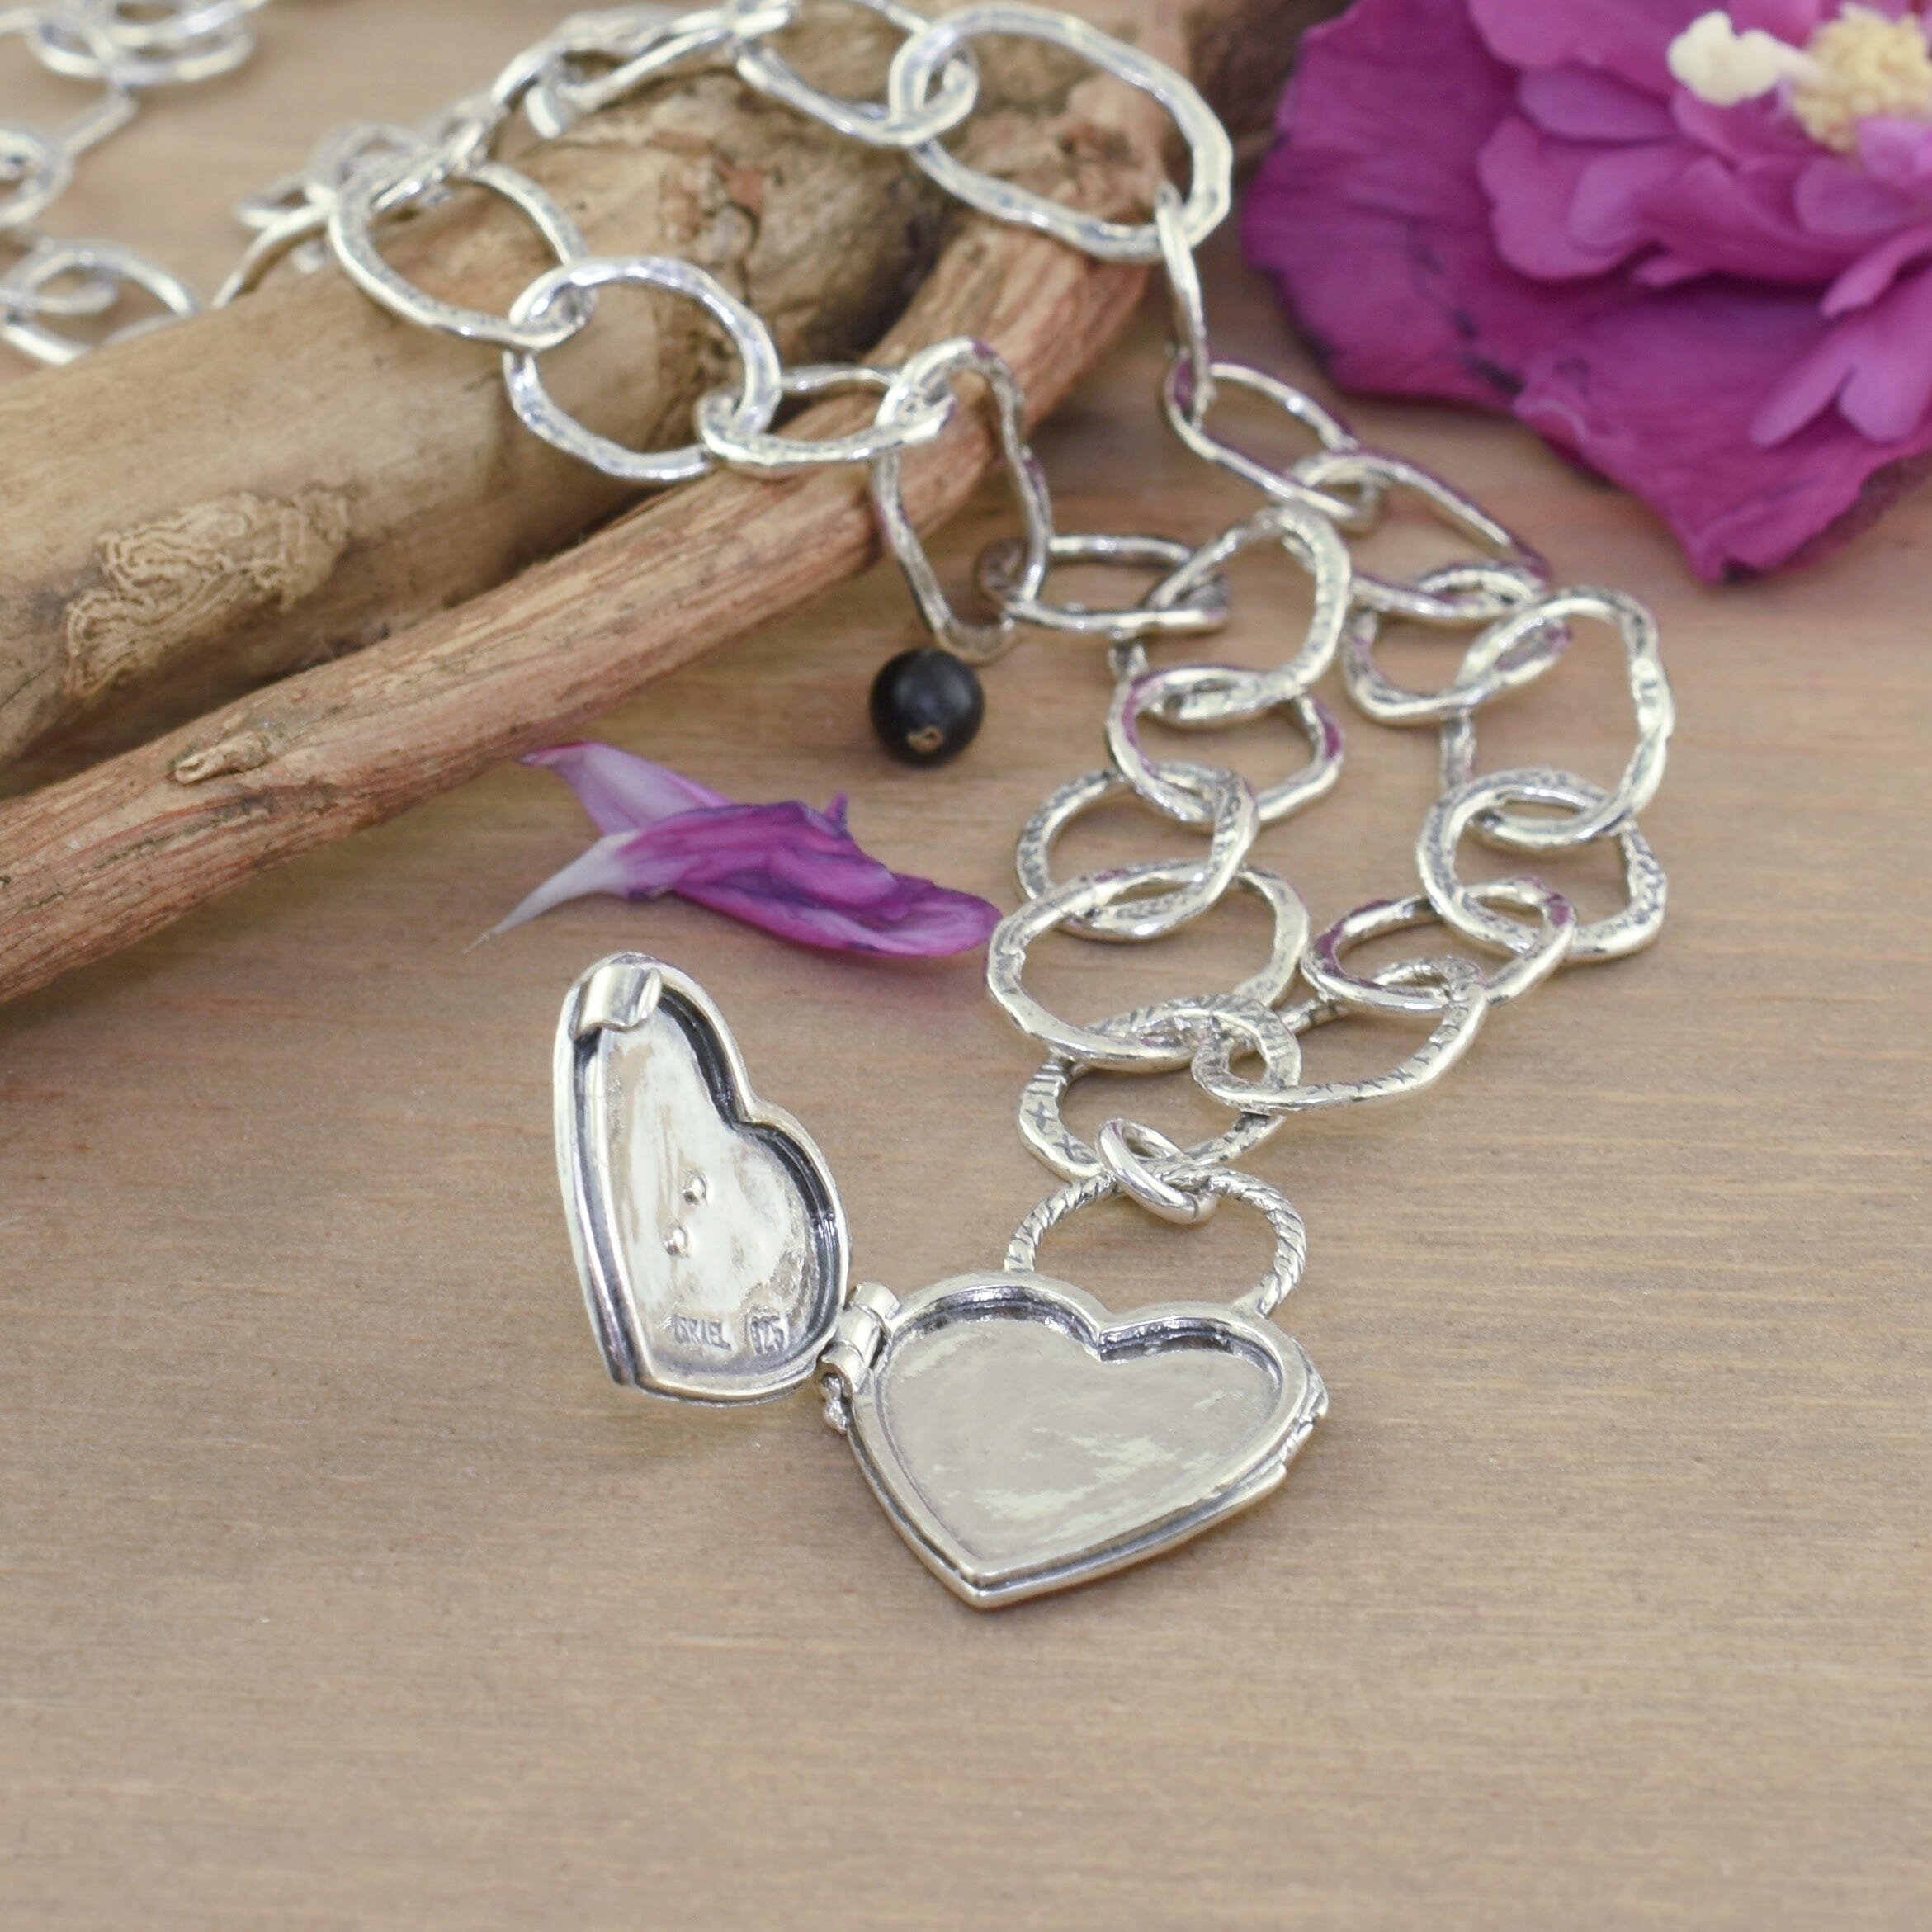 antique style sterling silver necklace with a heart locket pendant